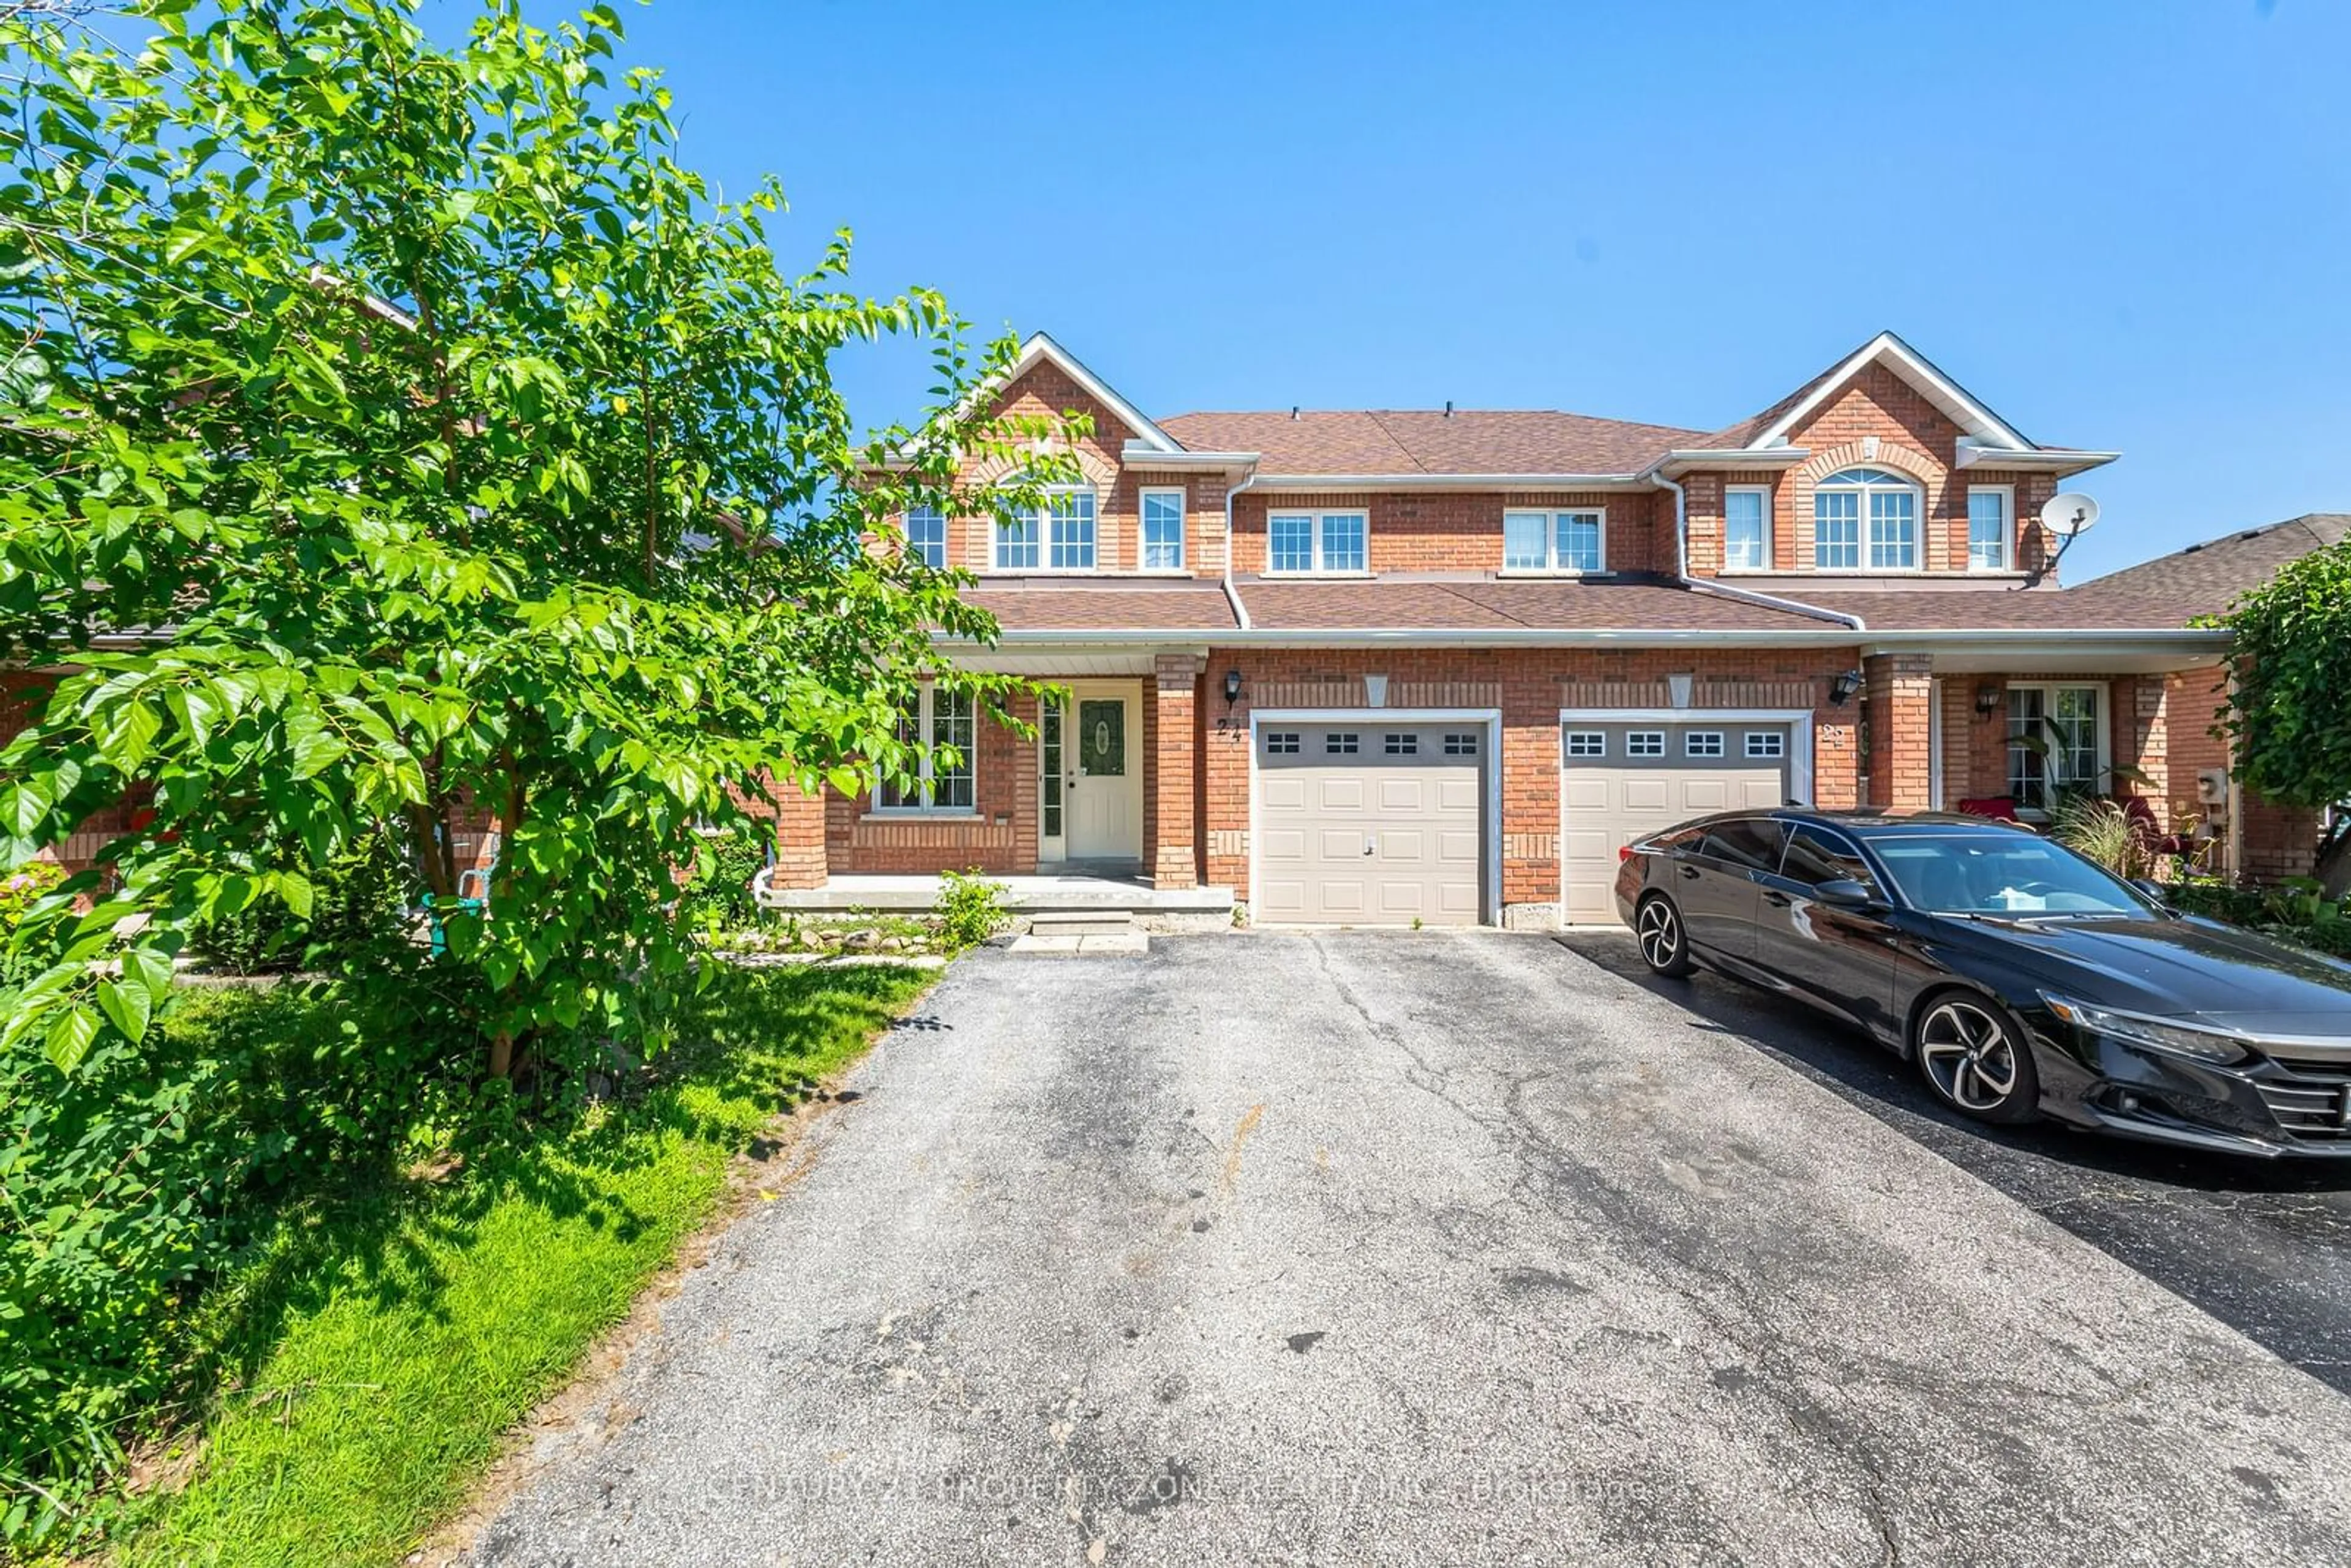 Home with brick exterior material for 24 Trask Dr, Barrie Ontario L4N 5R4